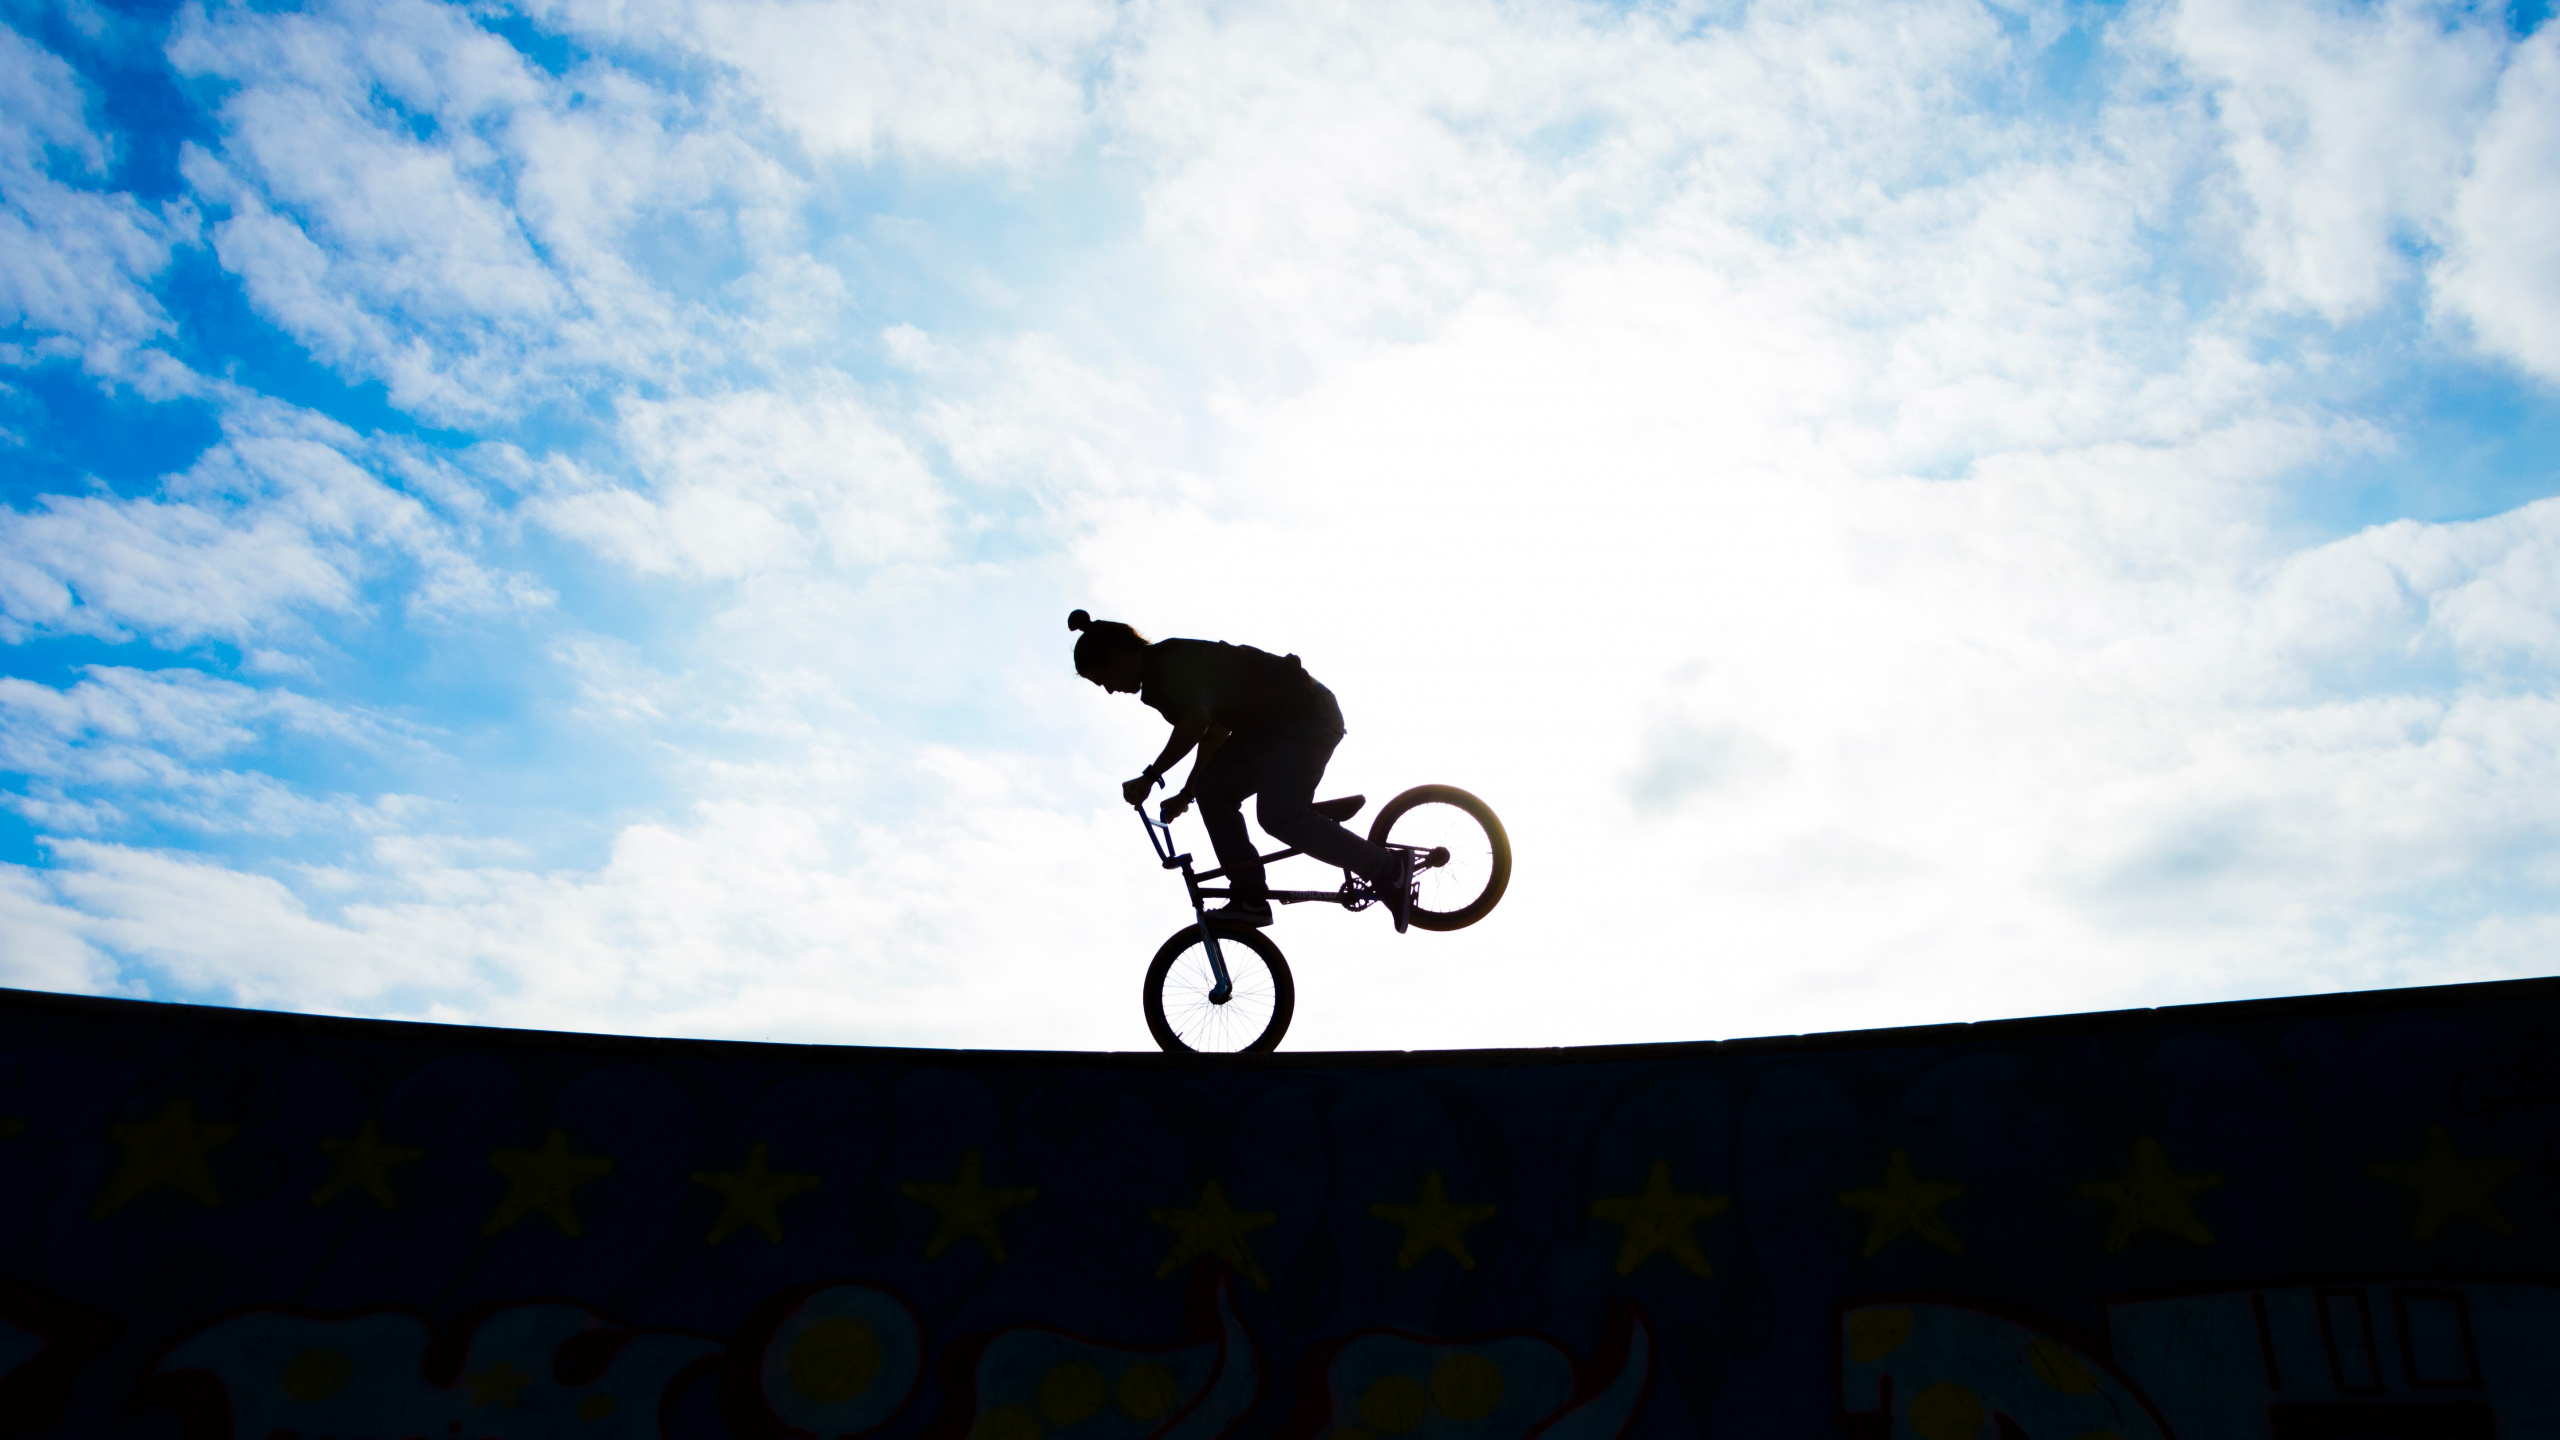 Man Riding Bicycle on Mid Air Under Blue Sky During Daytime. Wallpaper in 2560x1440 Resolution